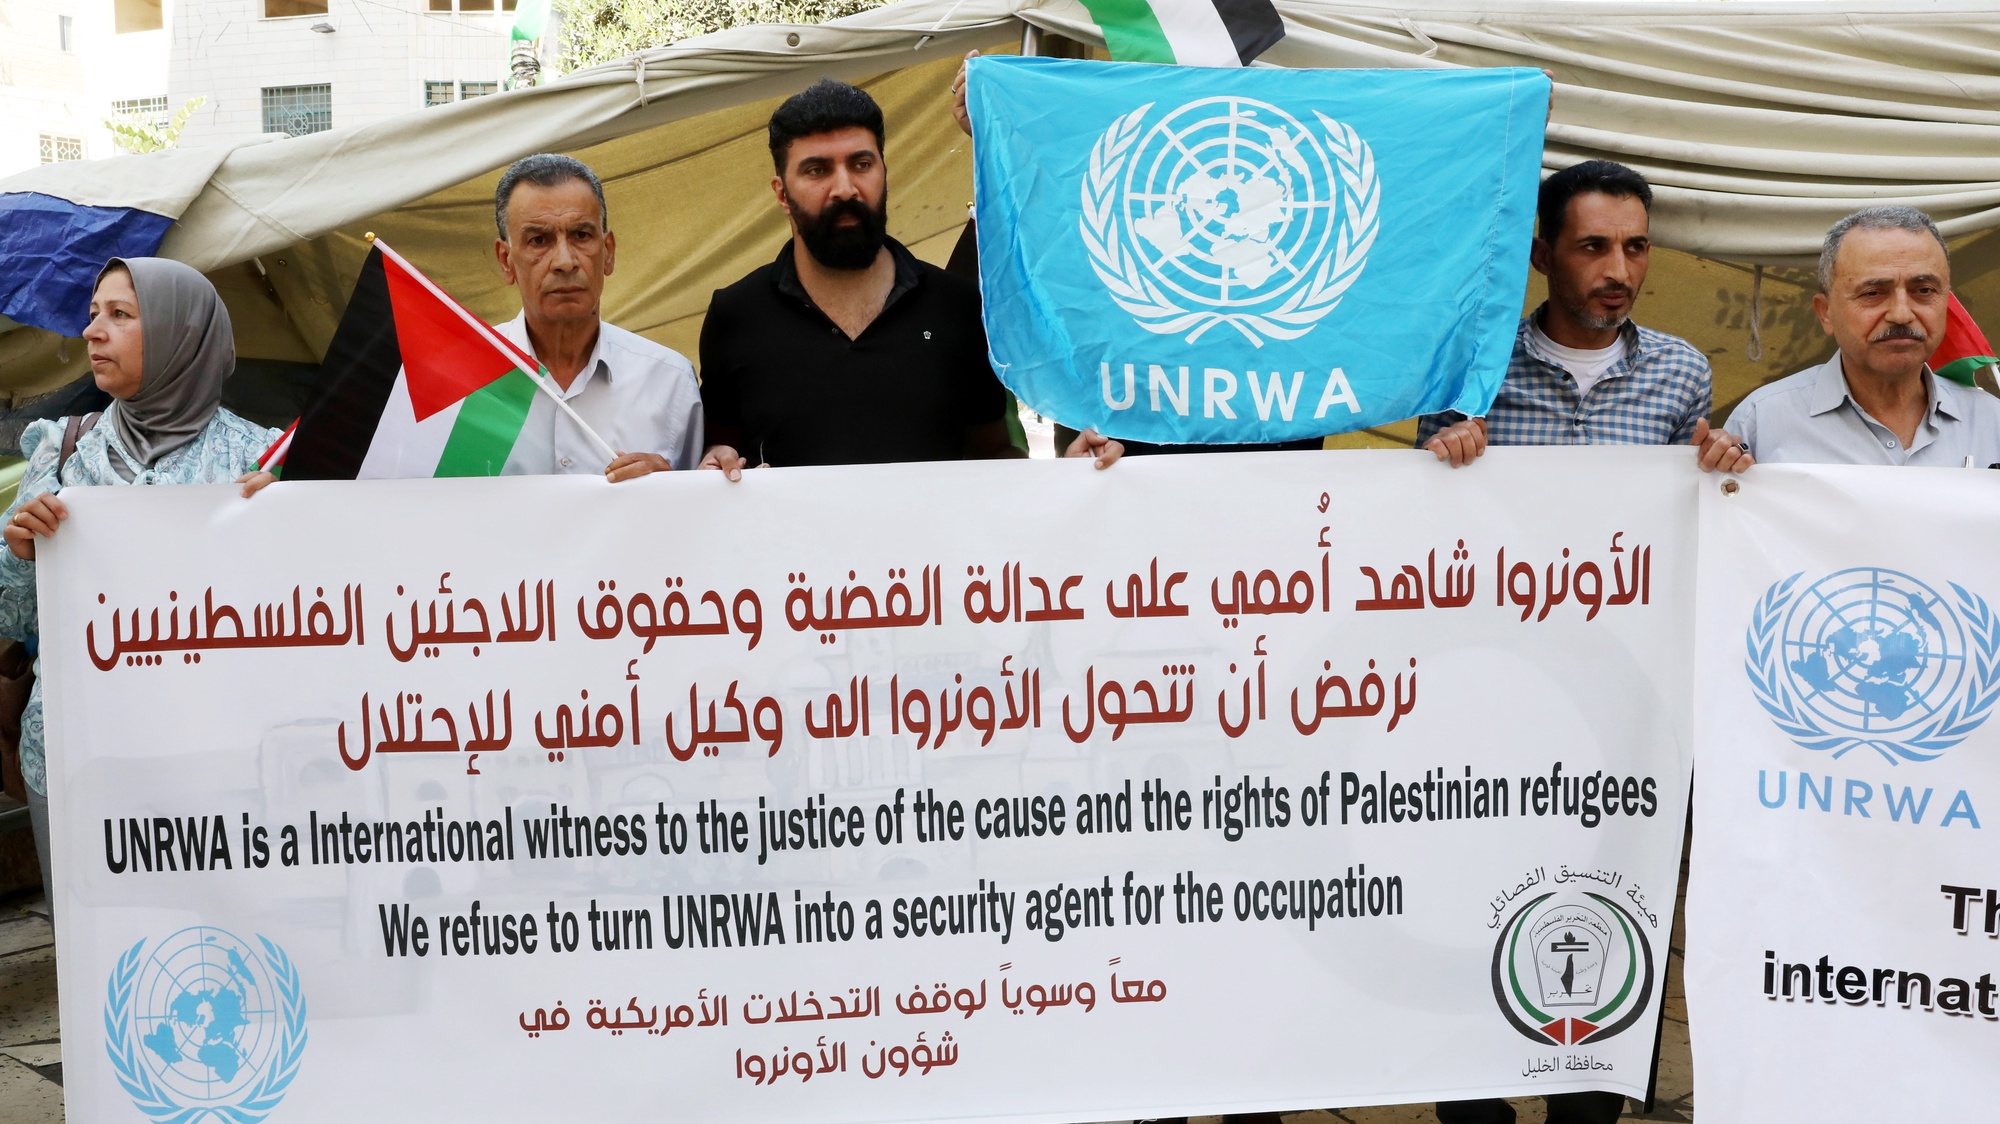 epa09510900 Palestinians refugees and activists protest against the framework agreement between the UN Relief and Works Agency for Palestine Refugees in the Near East (UNRWA) and the US, at the UNRWA headquarters in the West Bank city of Hebron, 07 October 2021. Palestinians are rejecting the US administration&#039;s decision to conditional funding within the framework signed between UNRWA and the US administration.  EPA/ABED AL HASHLAMOUN